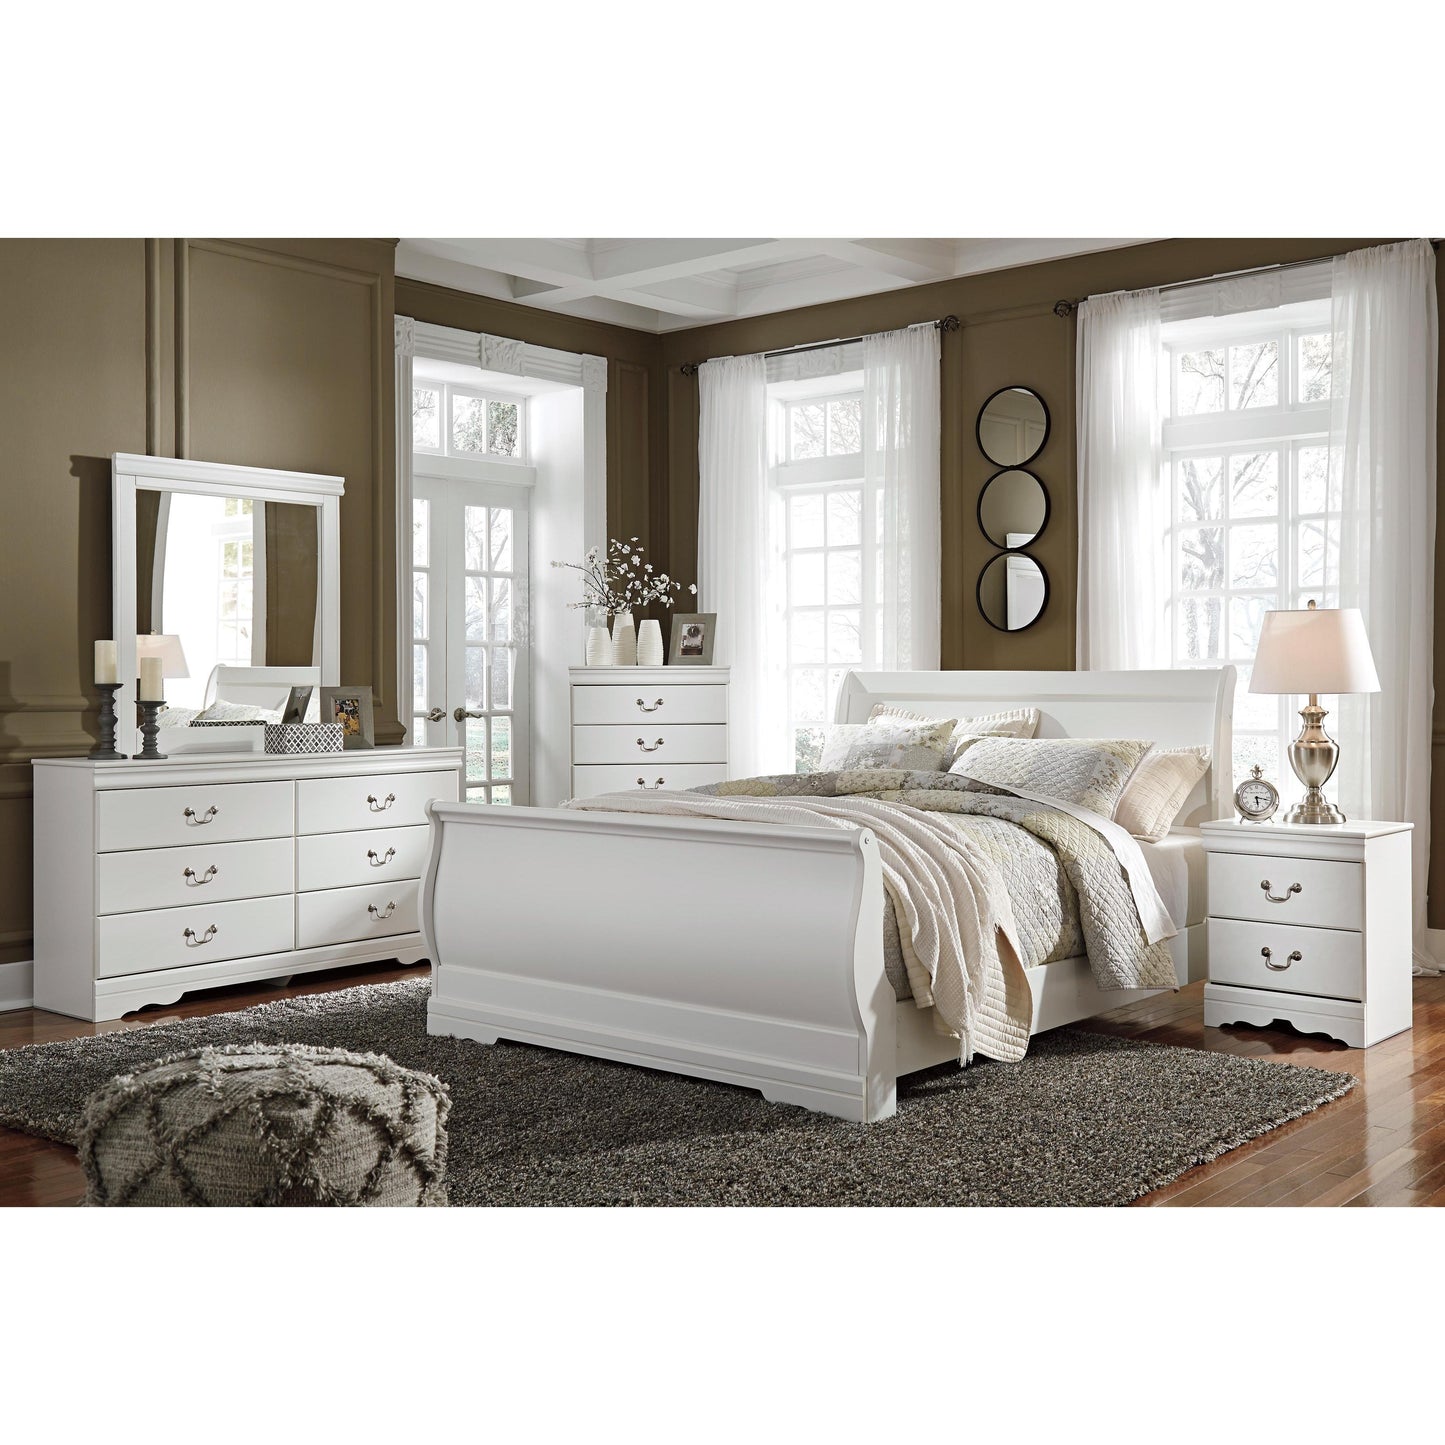 Signature Design by Ashley Anarasia B129 7 pc Queen Sleigh Bedroom Set IMAGE 1